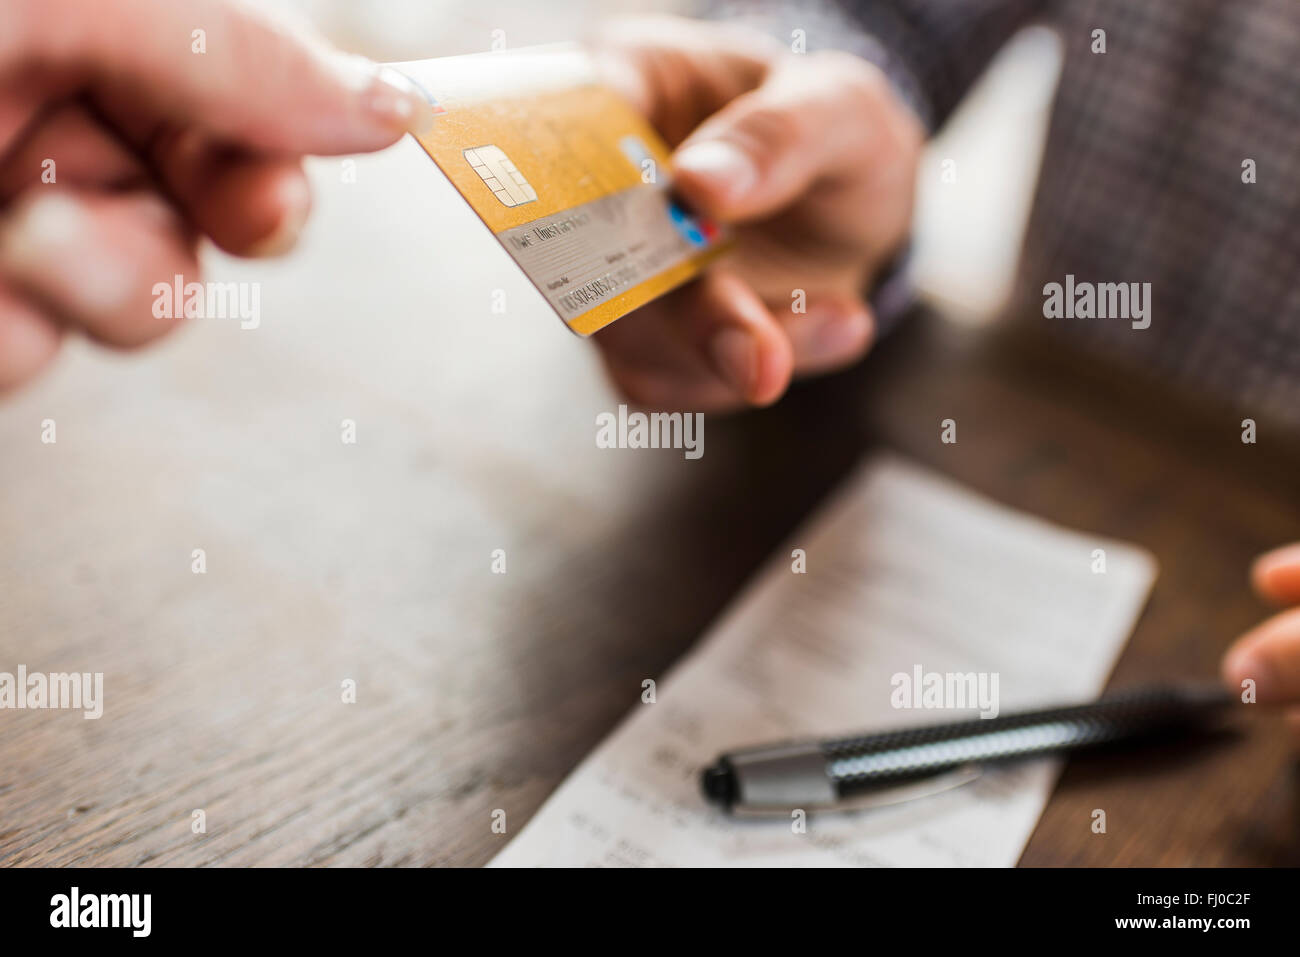 Close-up of tow hands with credit card Stock Photo